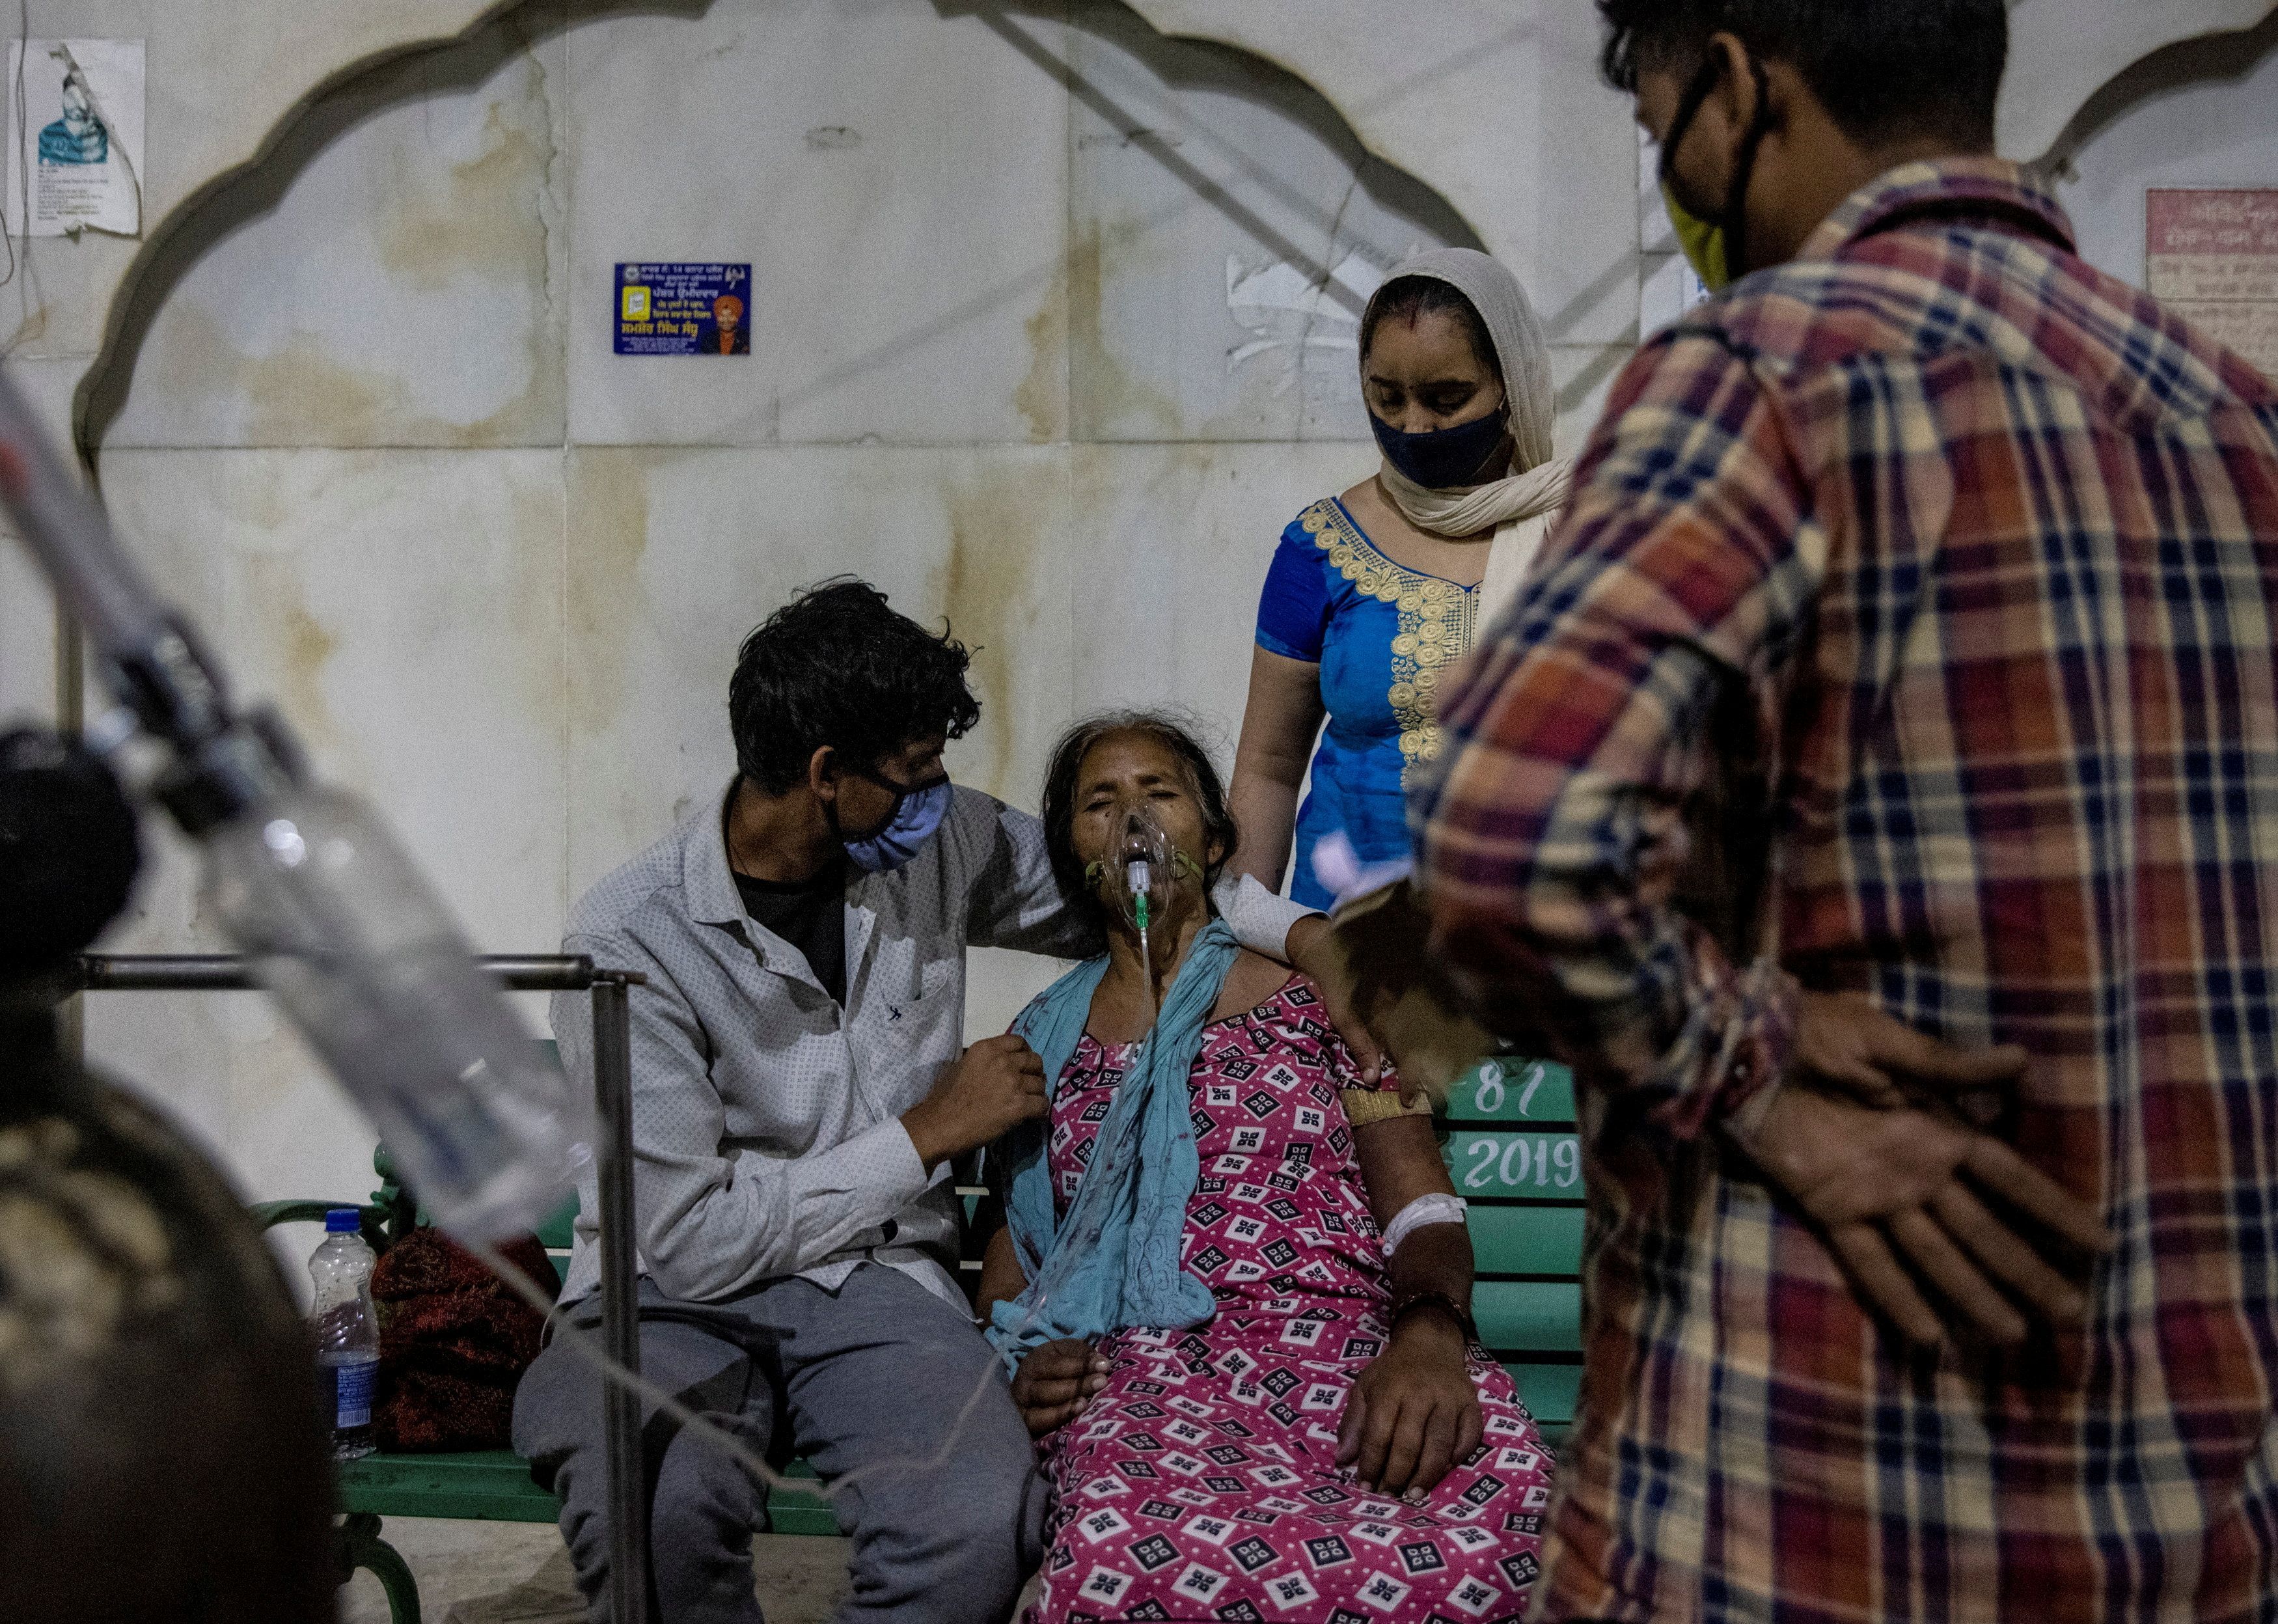 A woman with a breathing problem receives oxygen support for free at a Gurudwara, in Ghaziabad